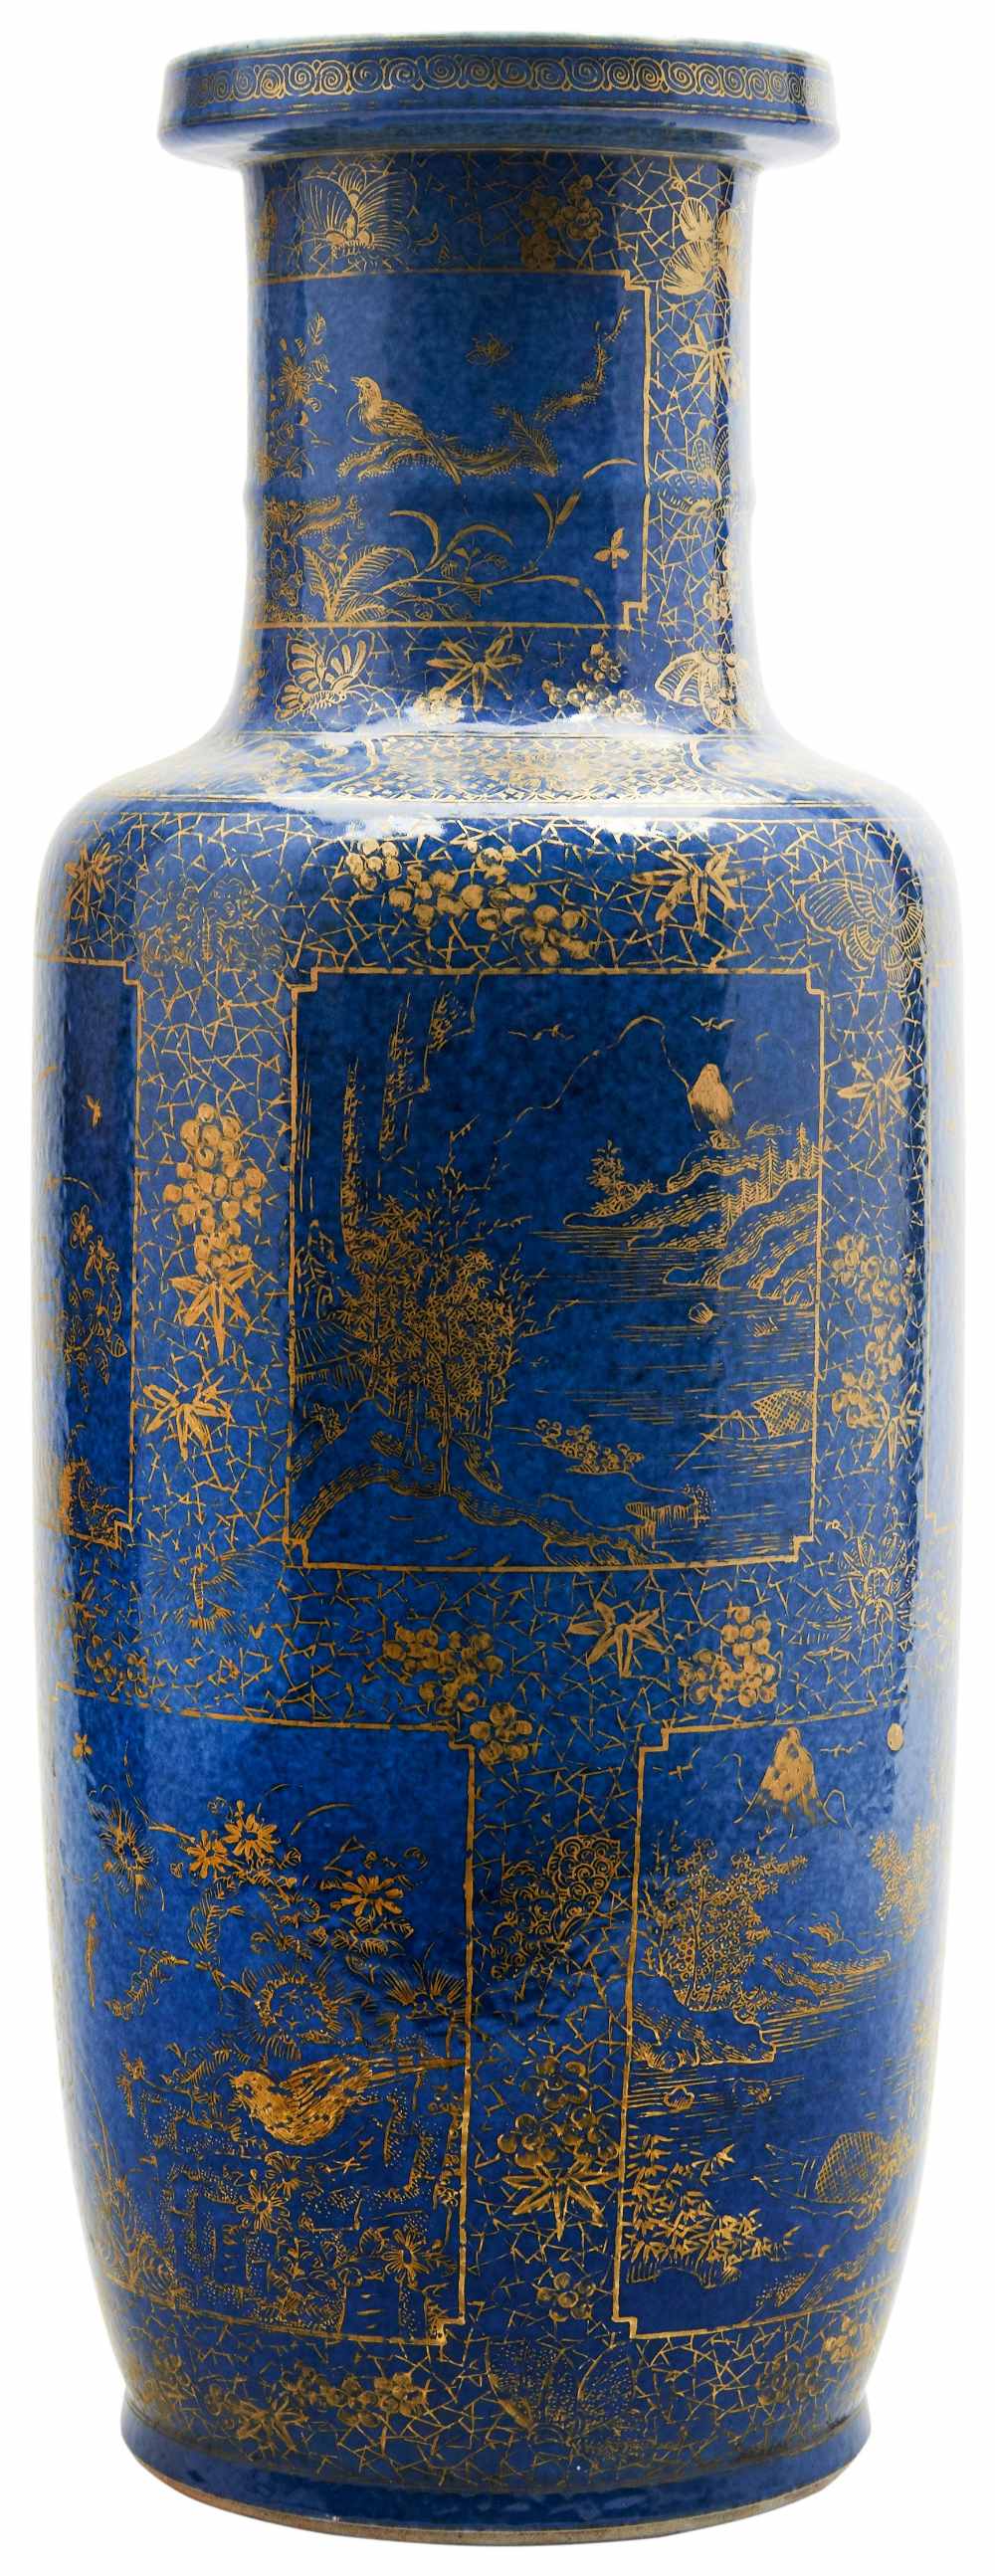 POWDER-BLUE-GROUND GILT-DECORATED ROULEAU VASE LATE QING DYNASTY the sides finely decorated with - Image 3 of 3